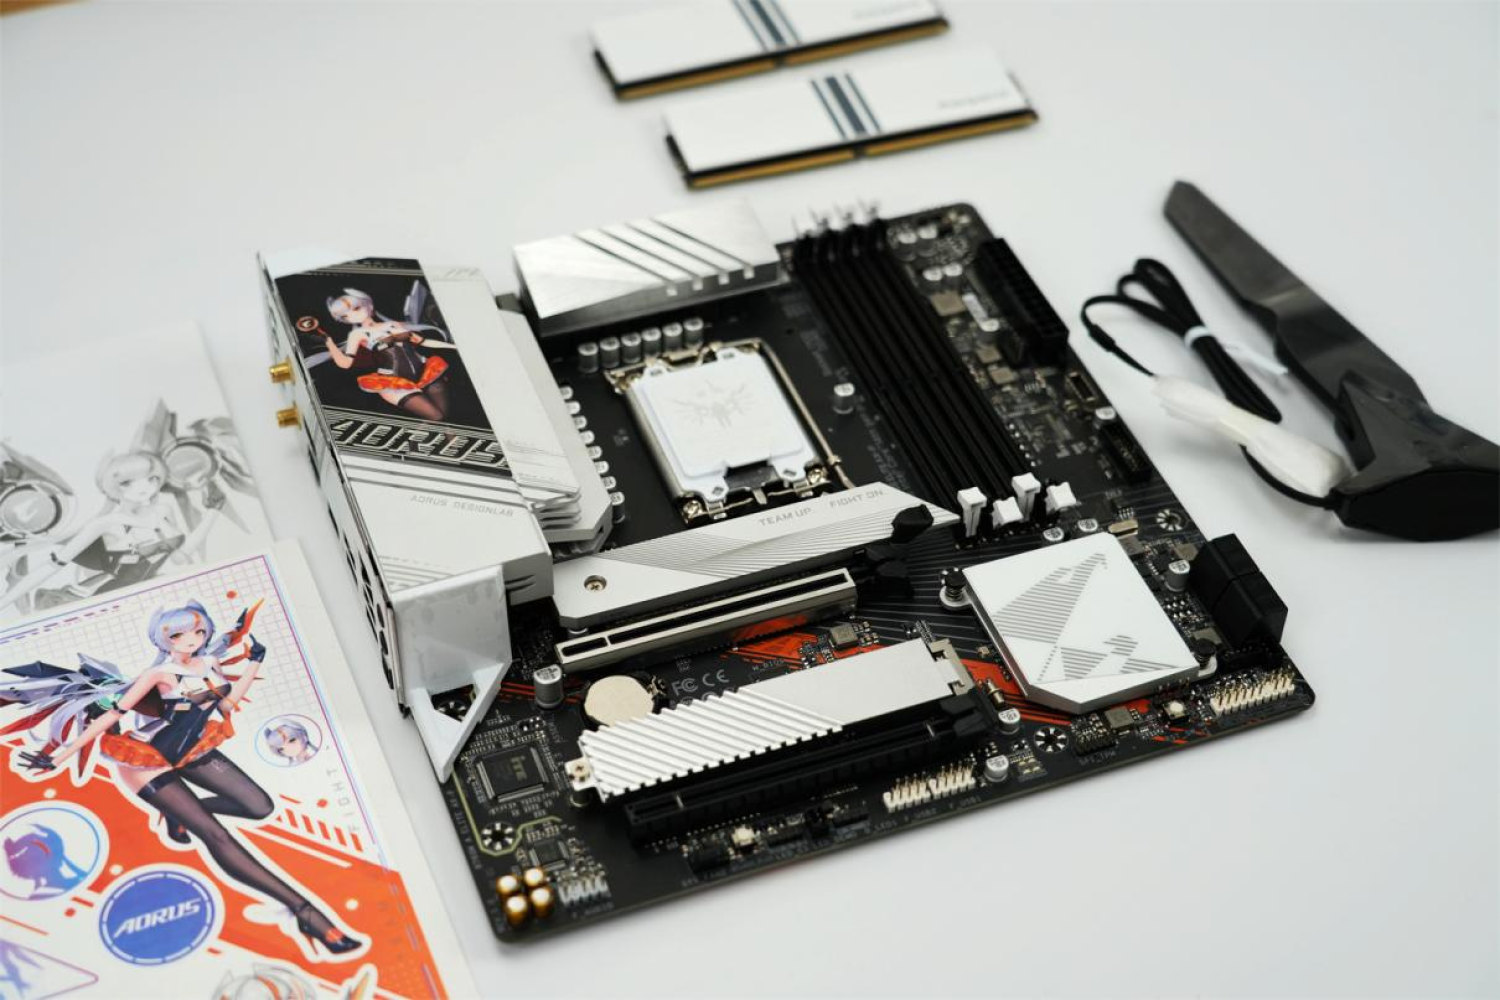  Performance king of the second dimension world: Gigabyte B760M new Diaoyi motherboard